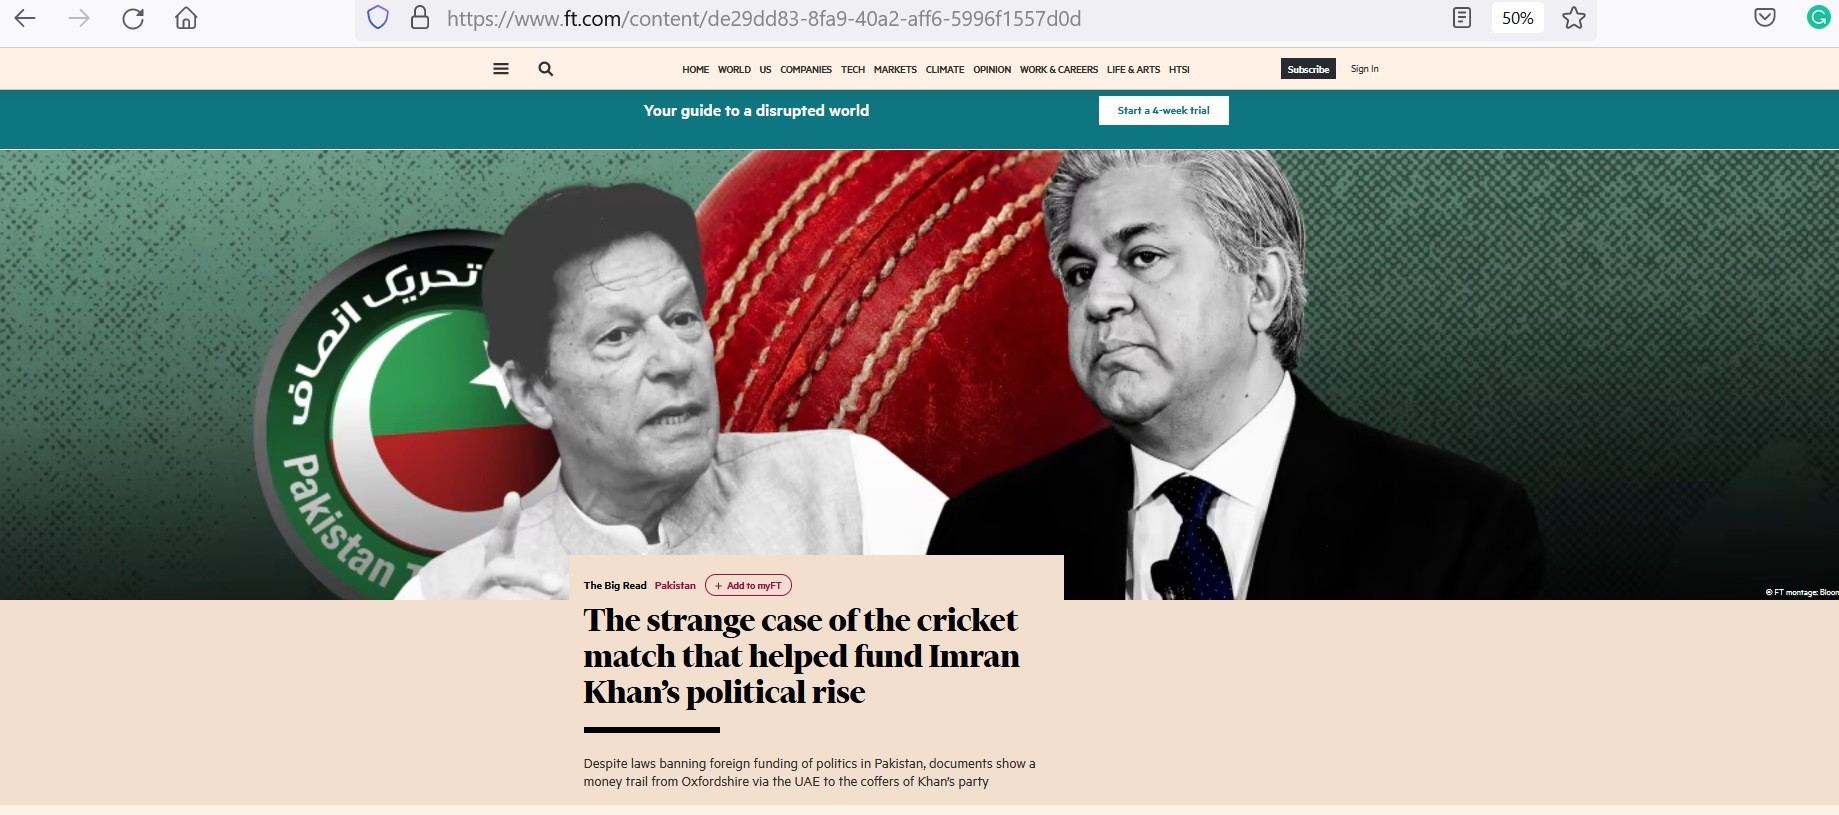 PTI Foreign Funding Case: Documents show a money trail from Abraaj Group to the PTI, claims the Financial Times